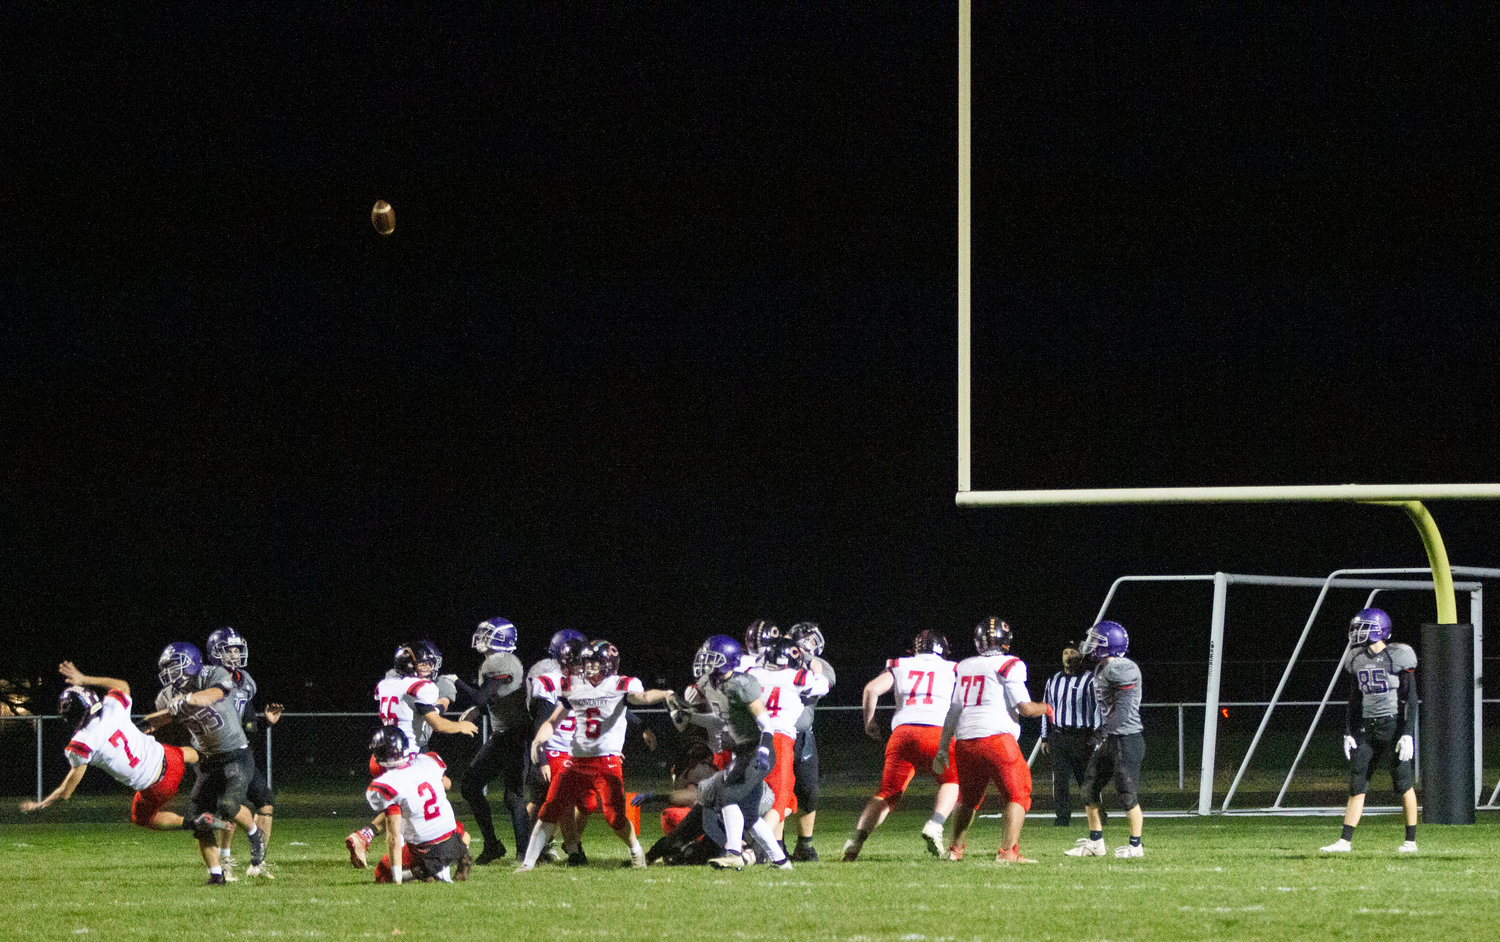 Brock Pacheco tips a Coventry extra point out of bounds and punishes the kicker earning a penalty on the play. The Oakers closer to the goal line, went for two, but were stuffed by the Huskies defense.